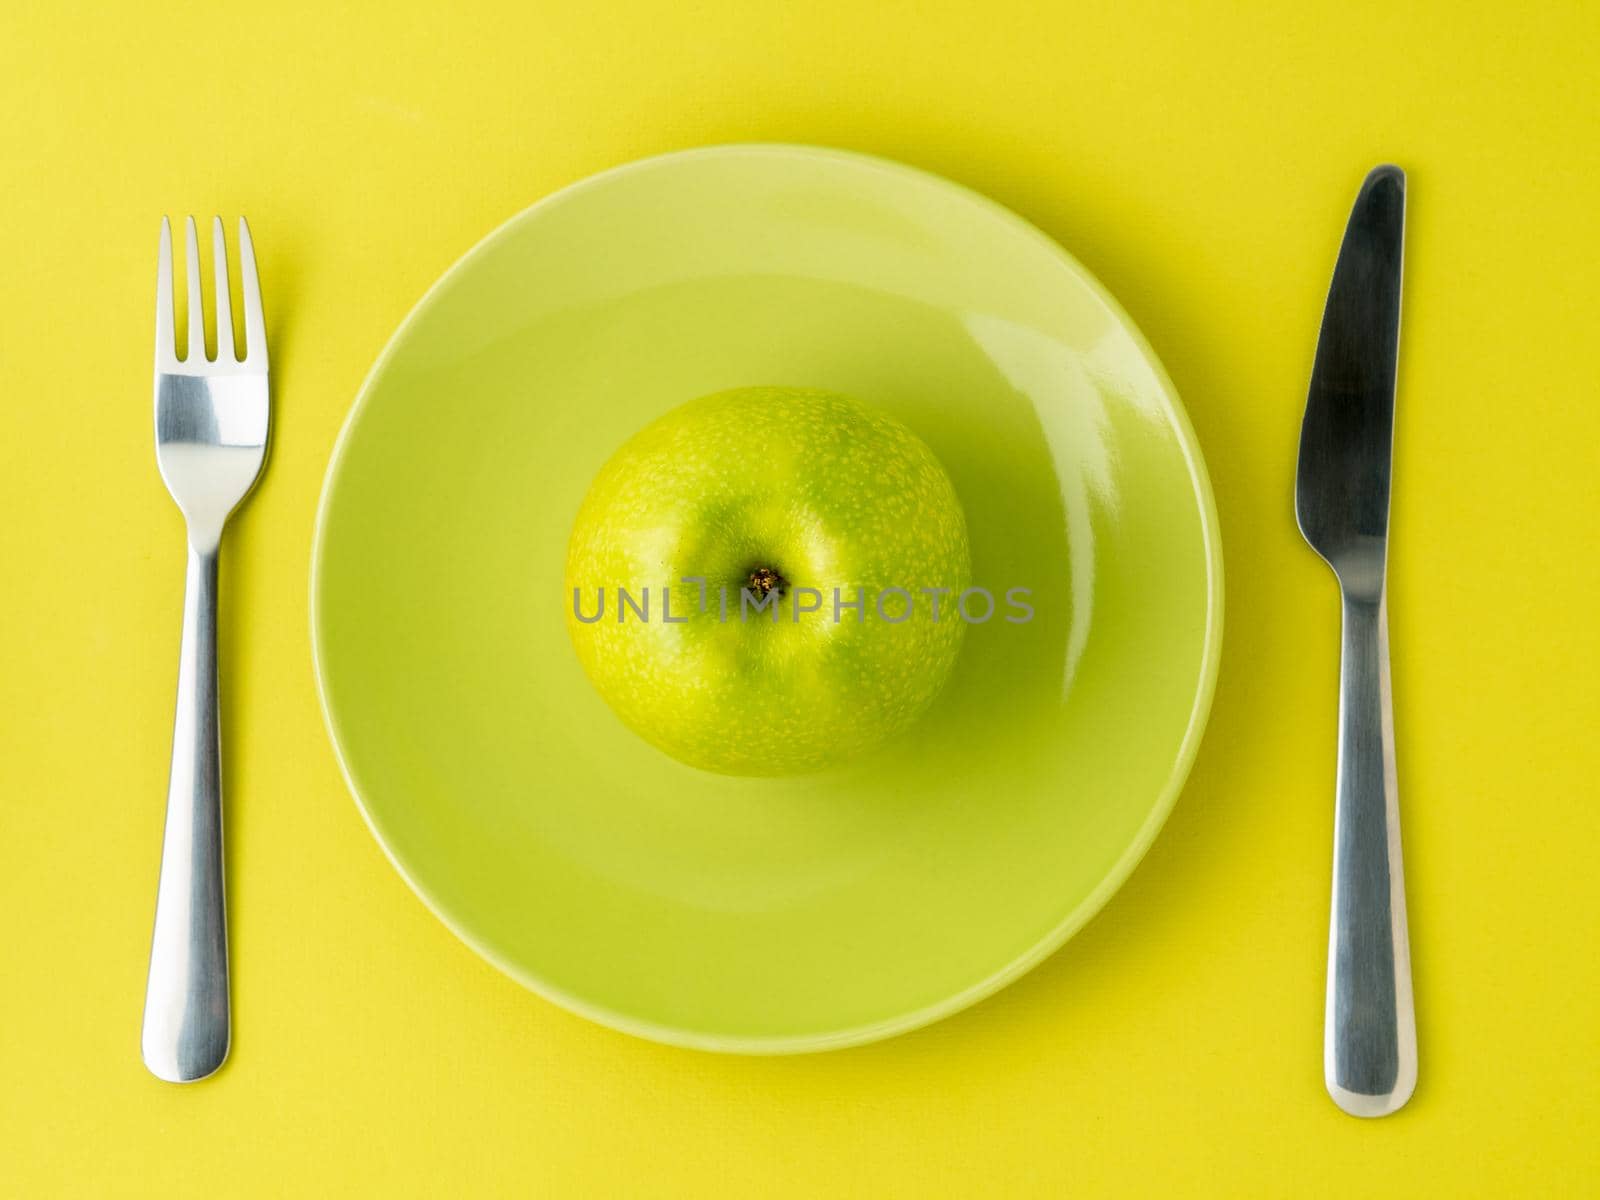 green ripe apples on a bright green plate, knife, fork on colorful yellow and green background, top view